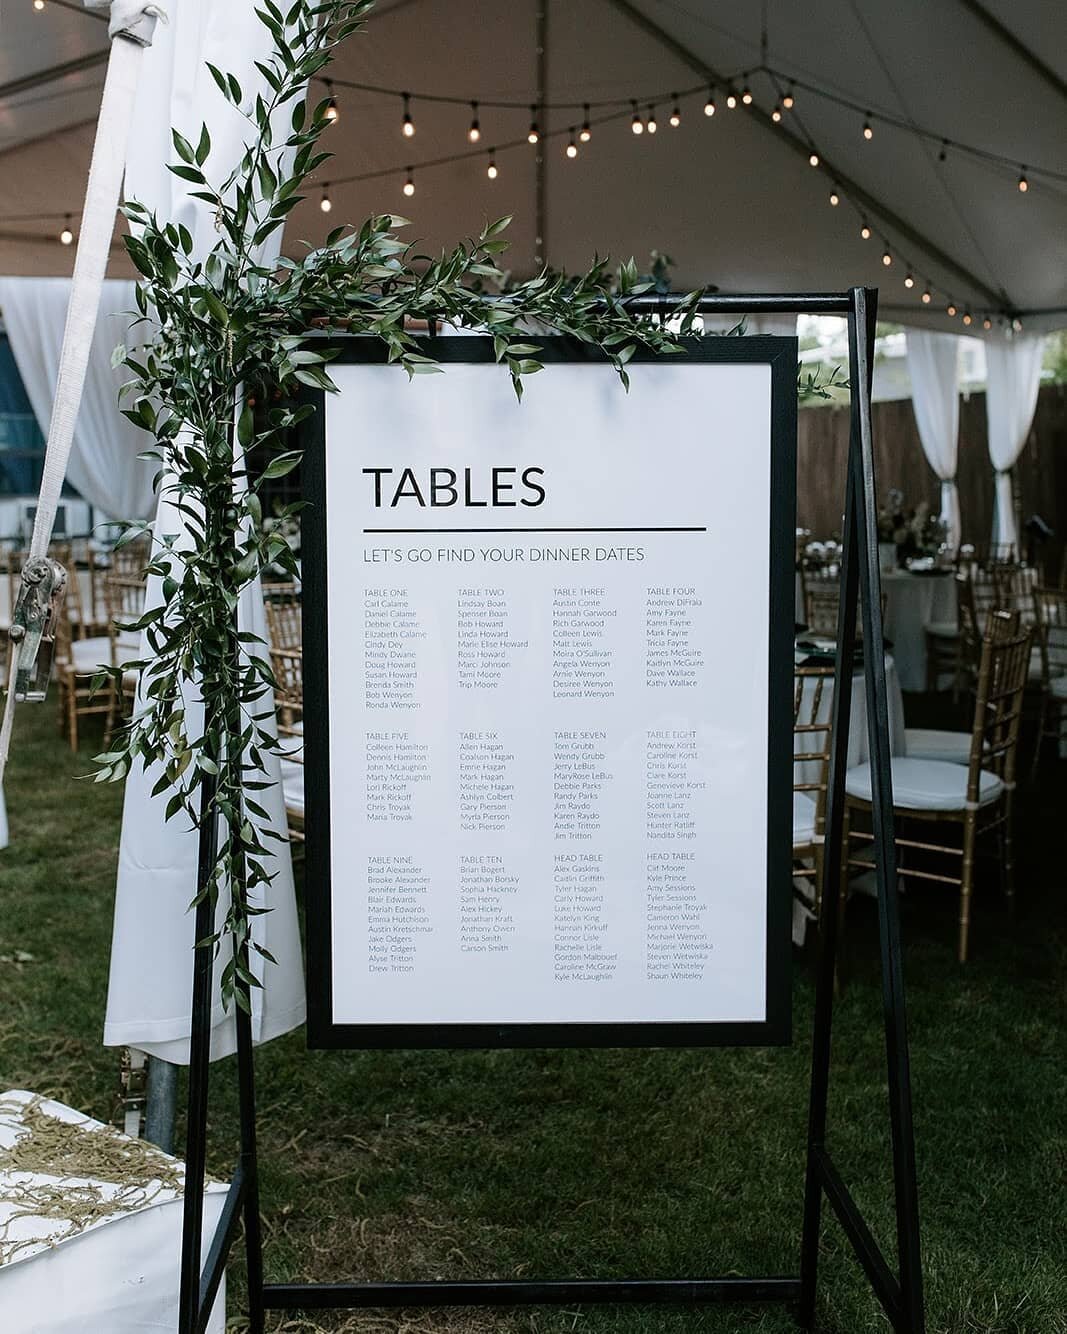 Hey Friends! #weddingplanningtip Tuesday: if you're organizing your seating chart by tables, make sure to place each guest name in alphabetical order under each table header so that guests can quickly find where they belong! 
Planner: @aubry.malis
.
